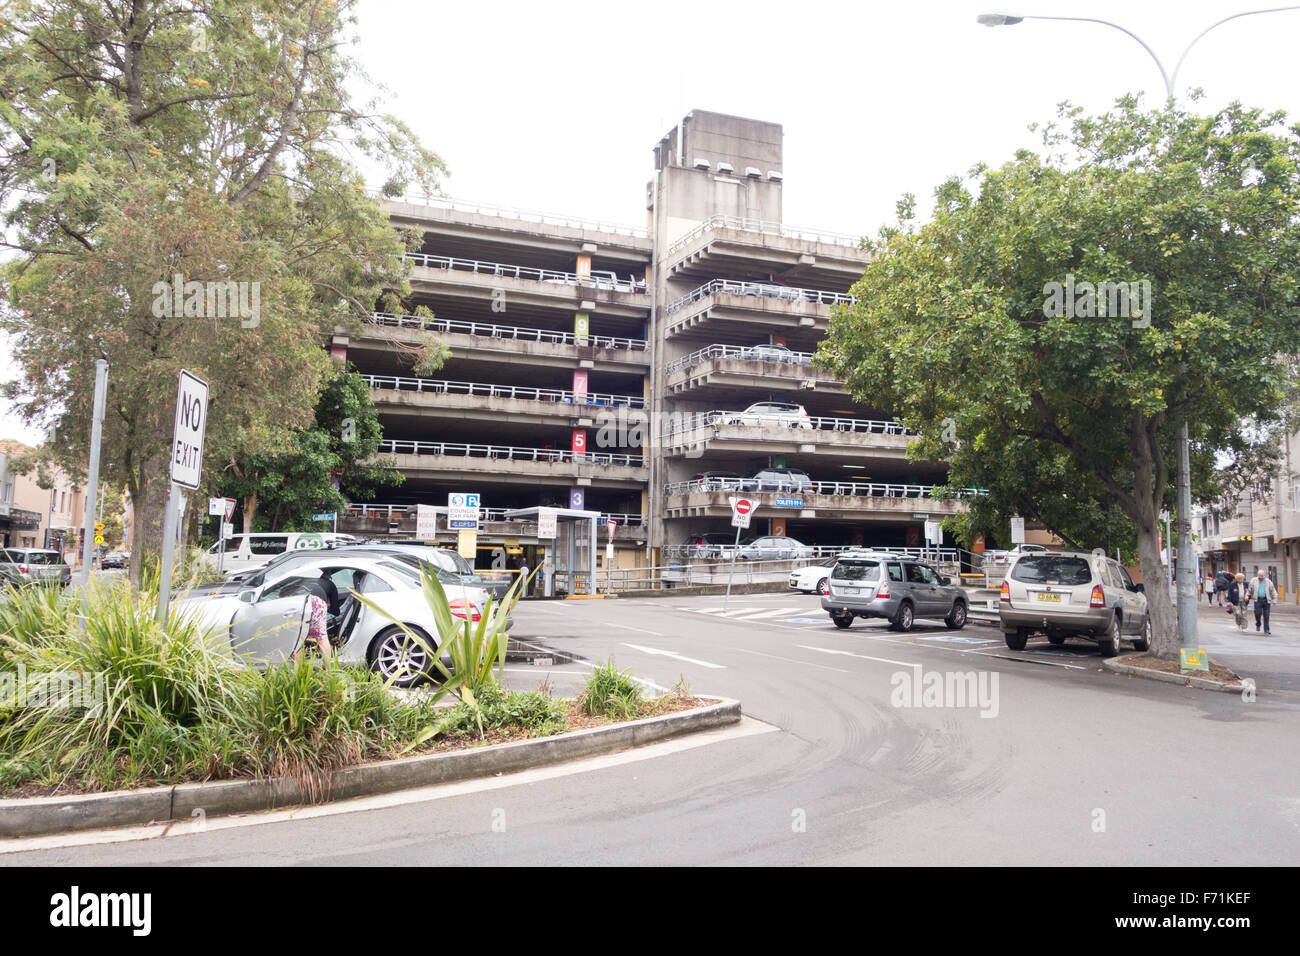 manly beach parking building Stock Photo